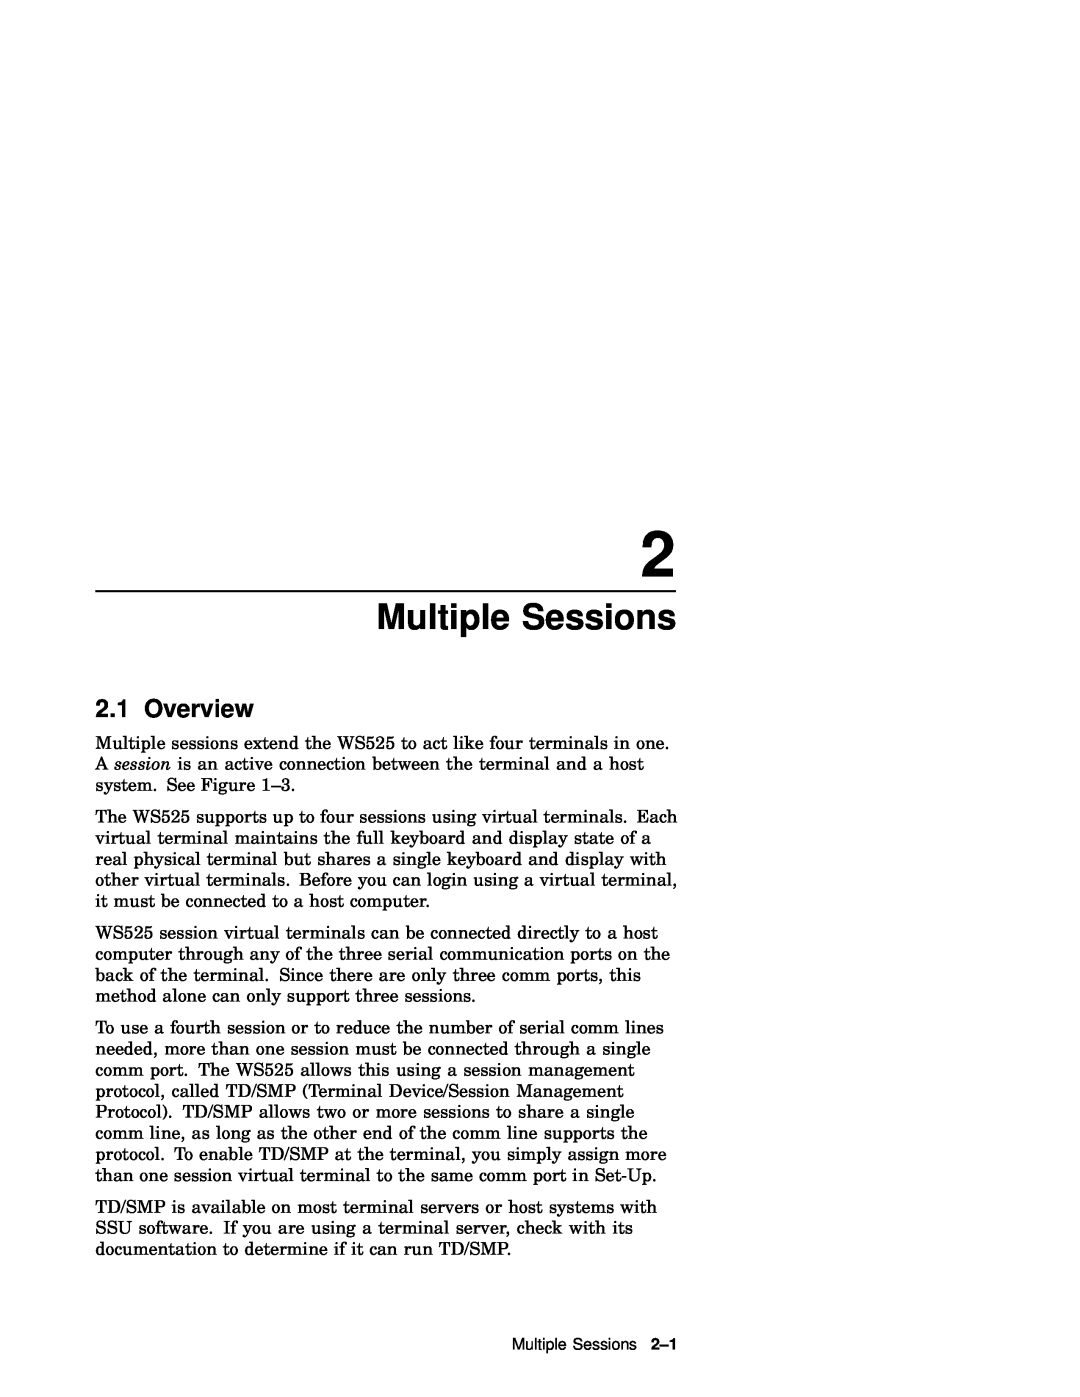 IBM WS525 manual Multiple Sessions, Overview 